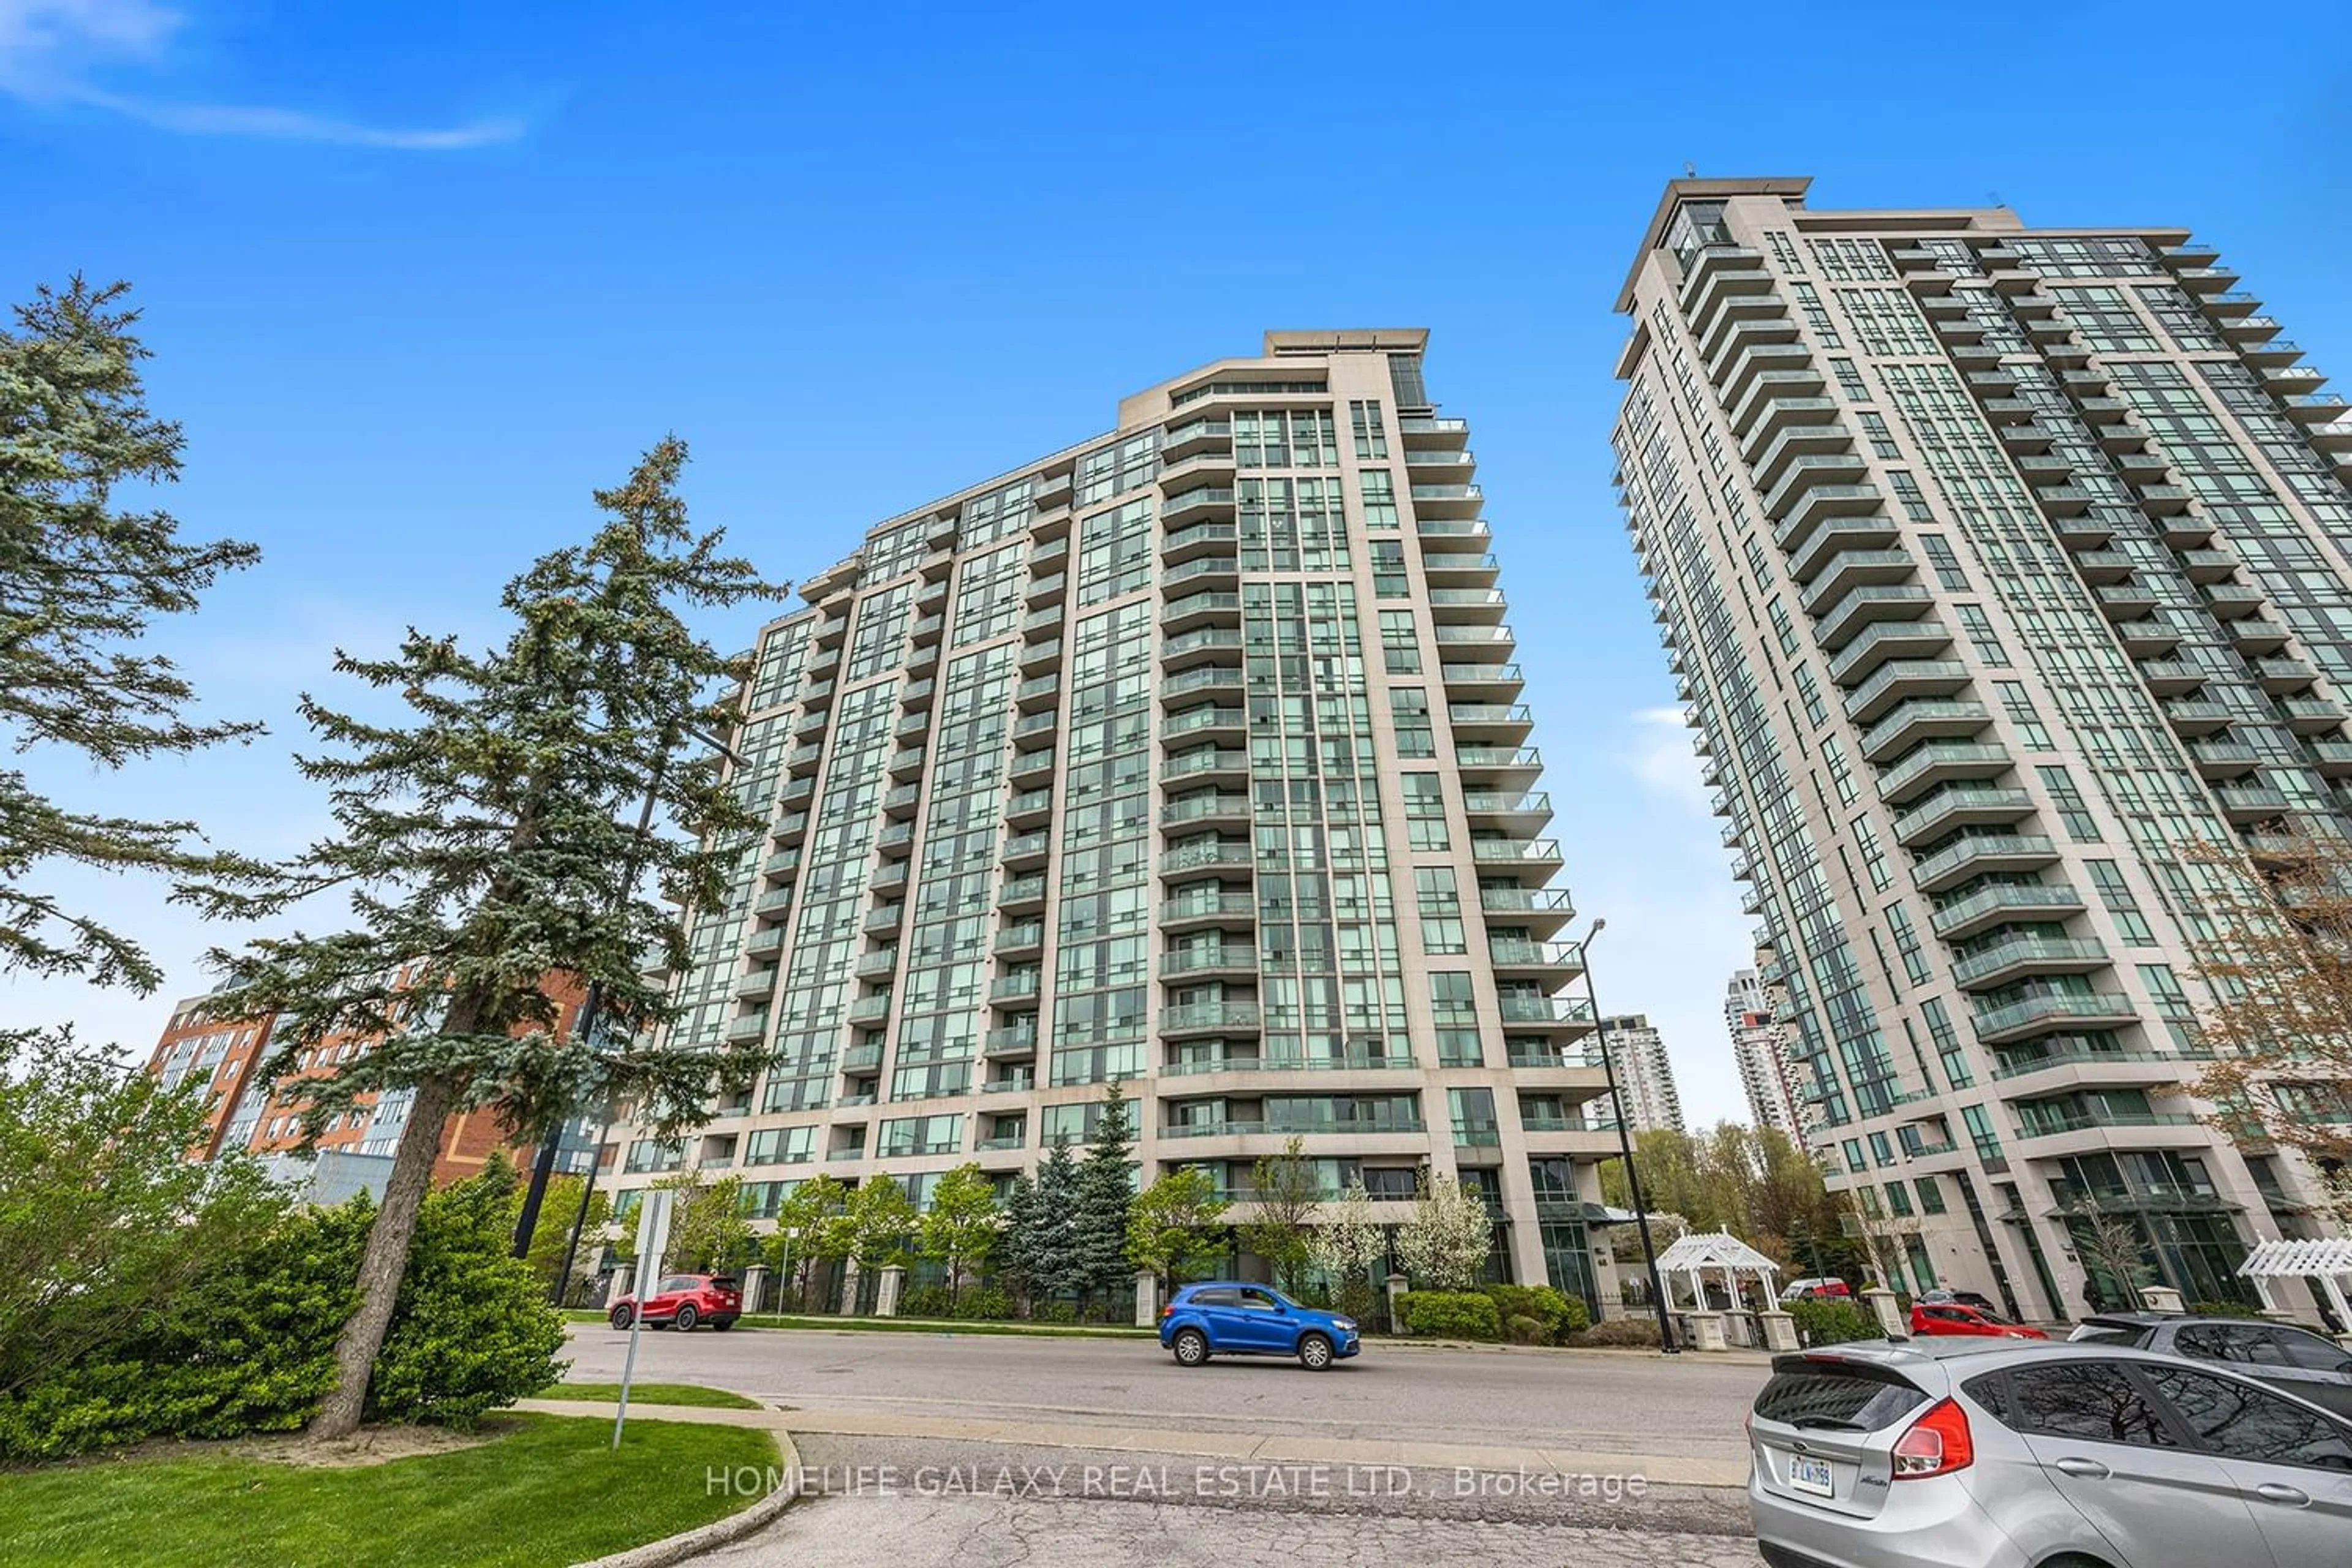 A pic from exterior of the house or condo for 68 Grangeway Ave #1507, Toronto Ontario M1H 0A1